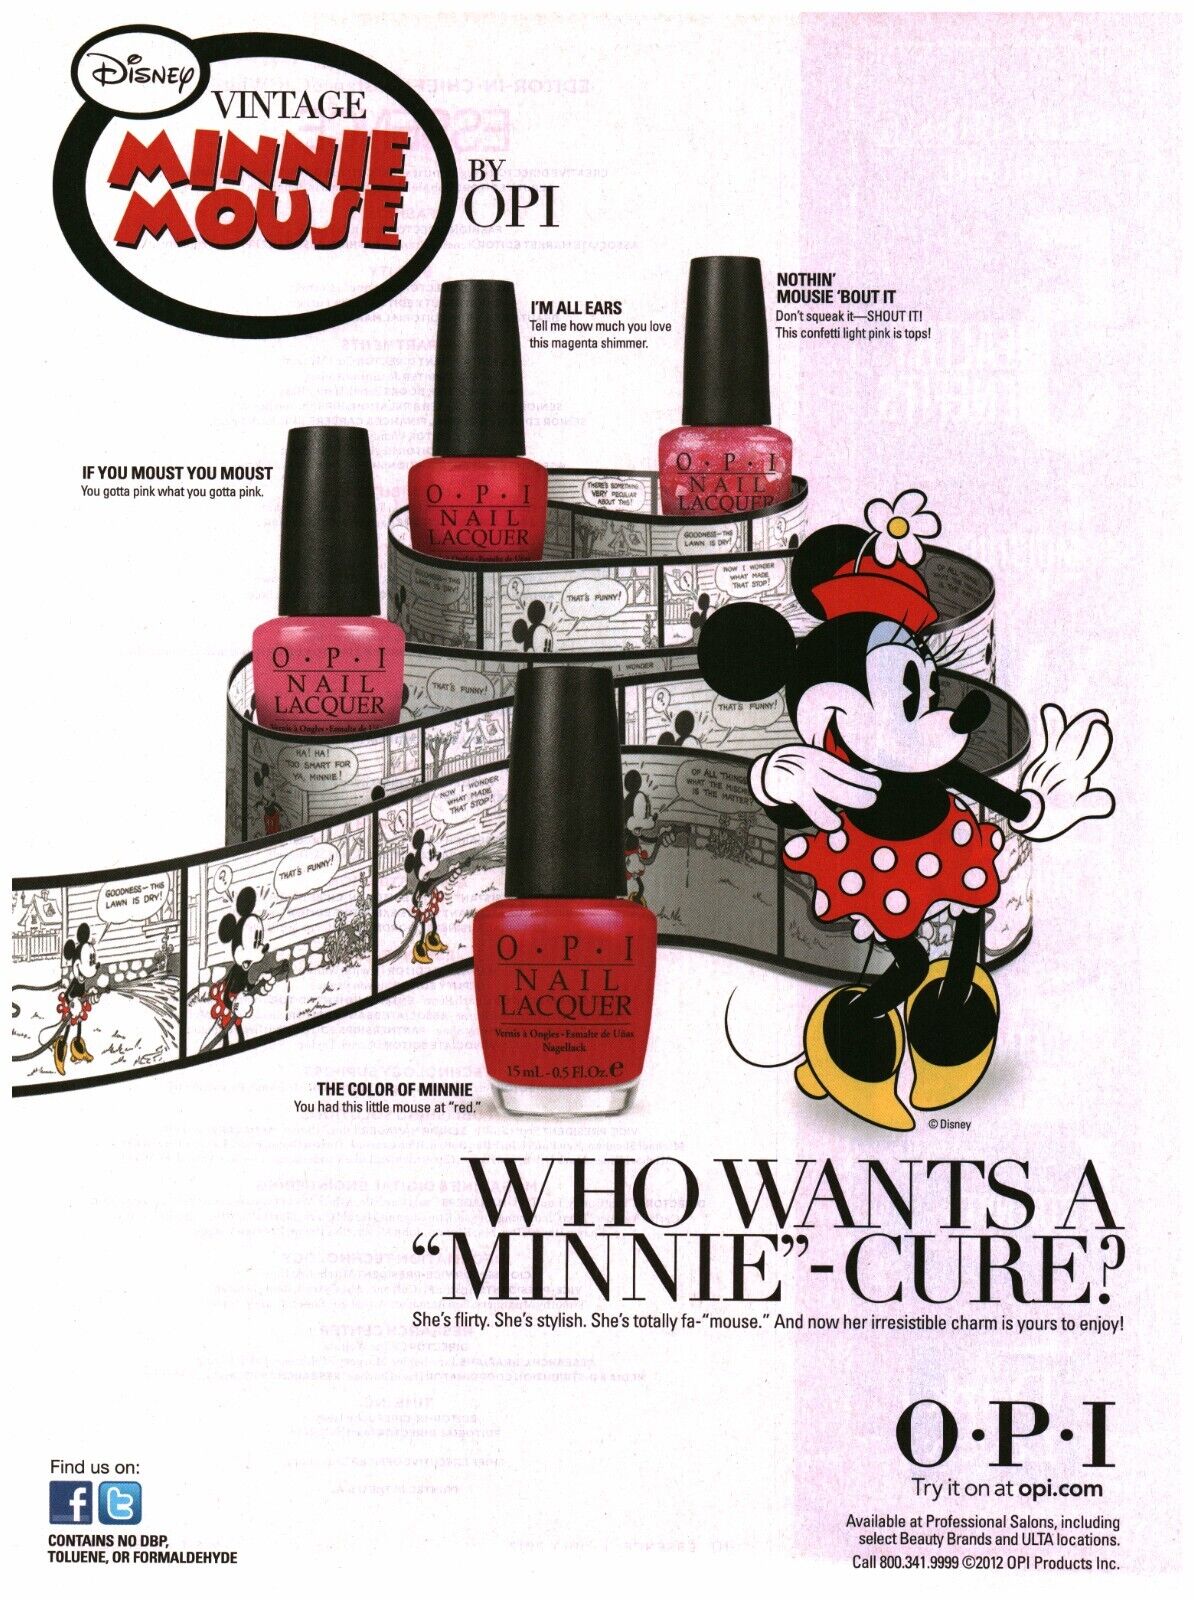 2012 PRINT AD - O-P-I NAIL LACQUER AD - DISNEY VINTAGE MINNIE MOUSE BY OPI AD